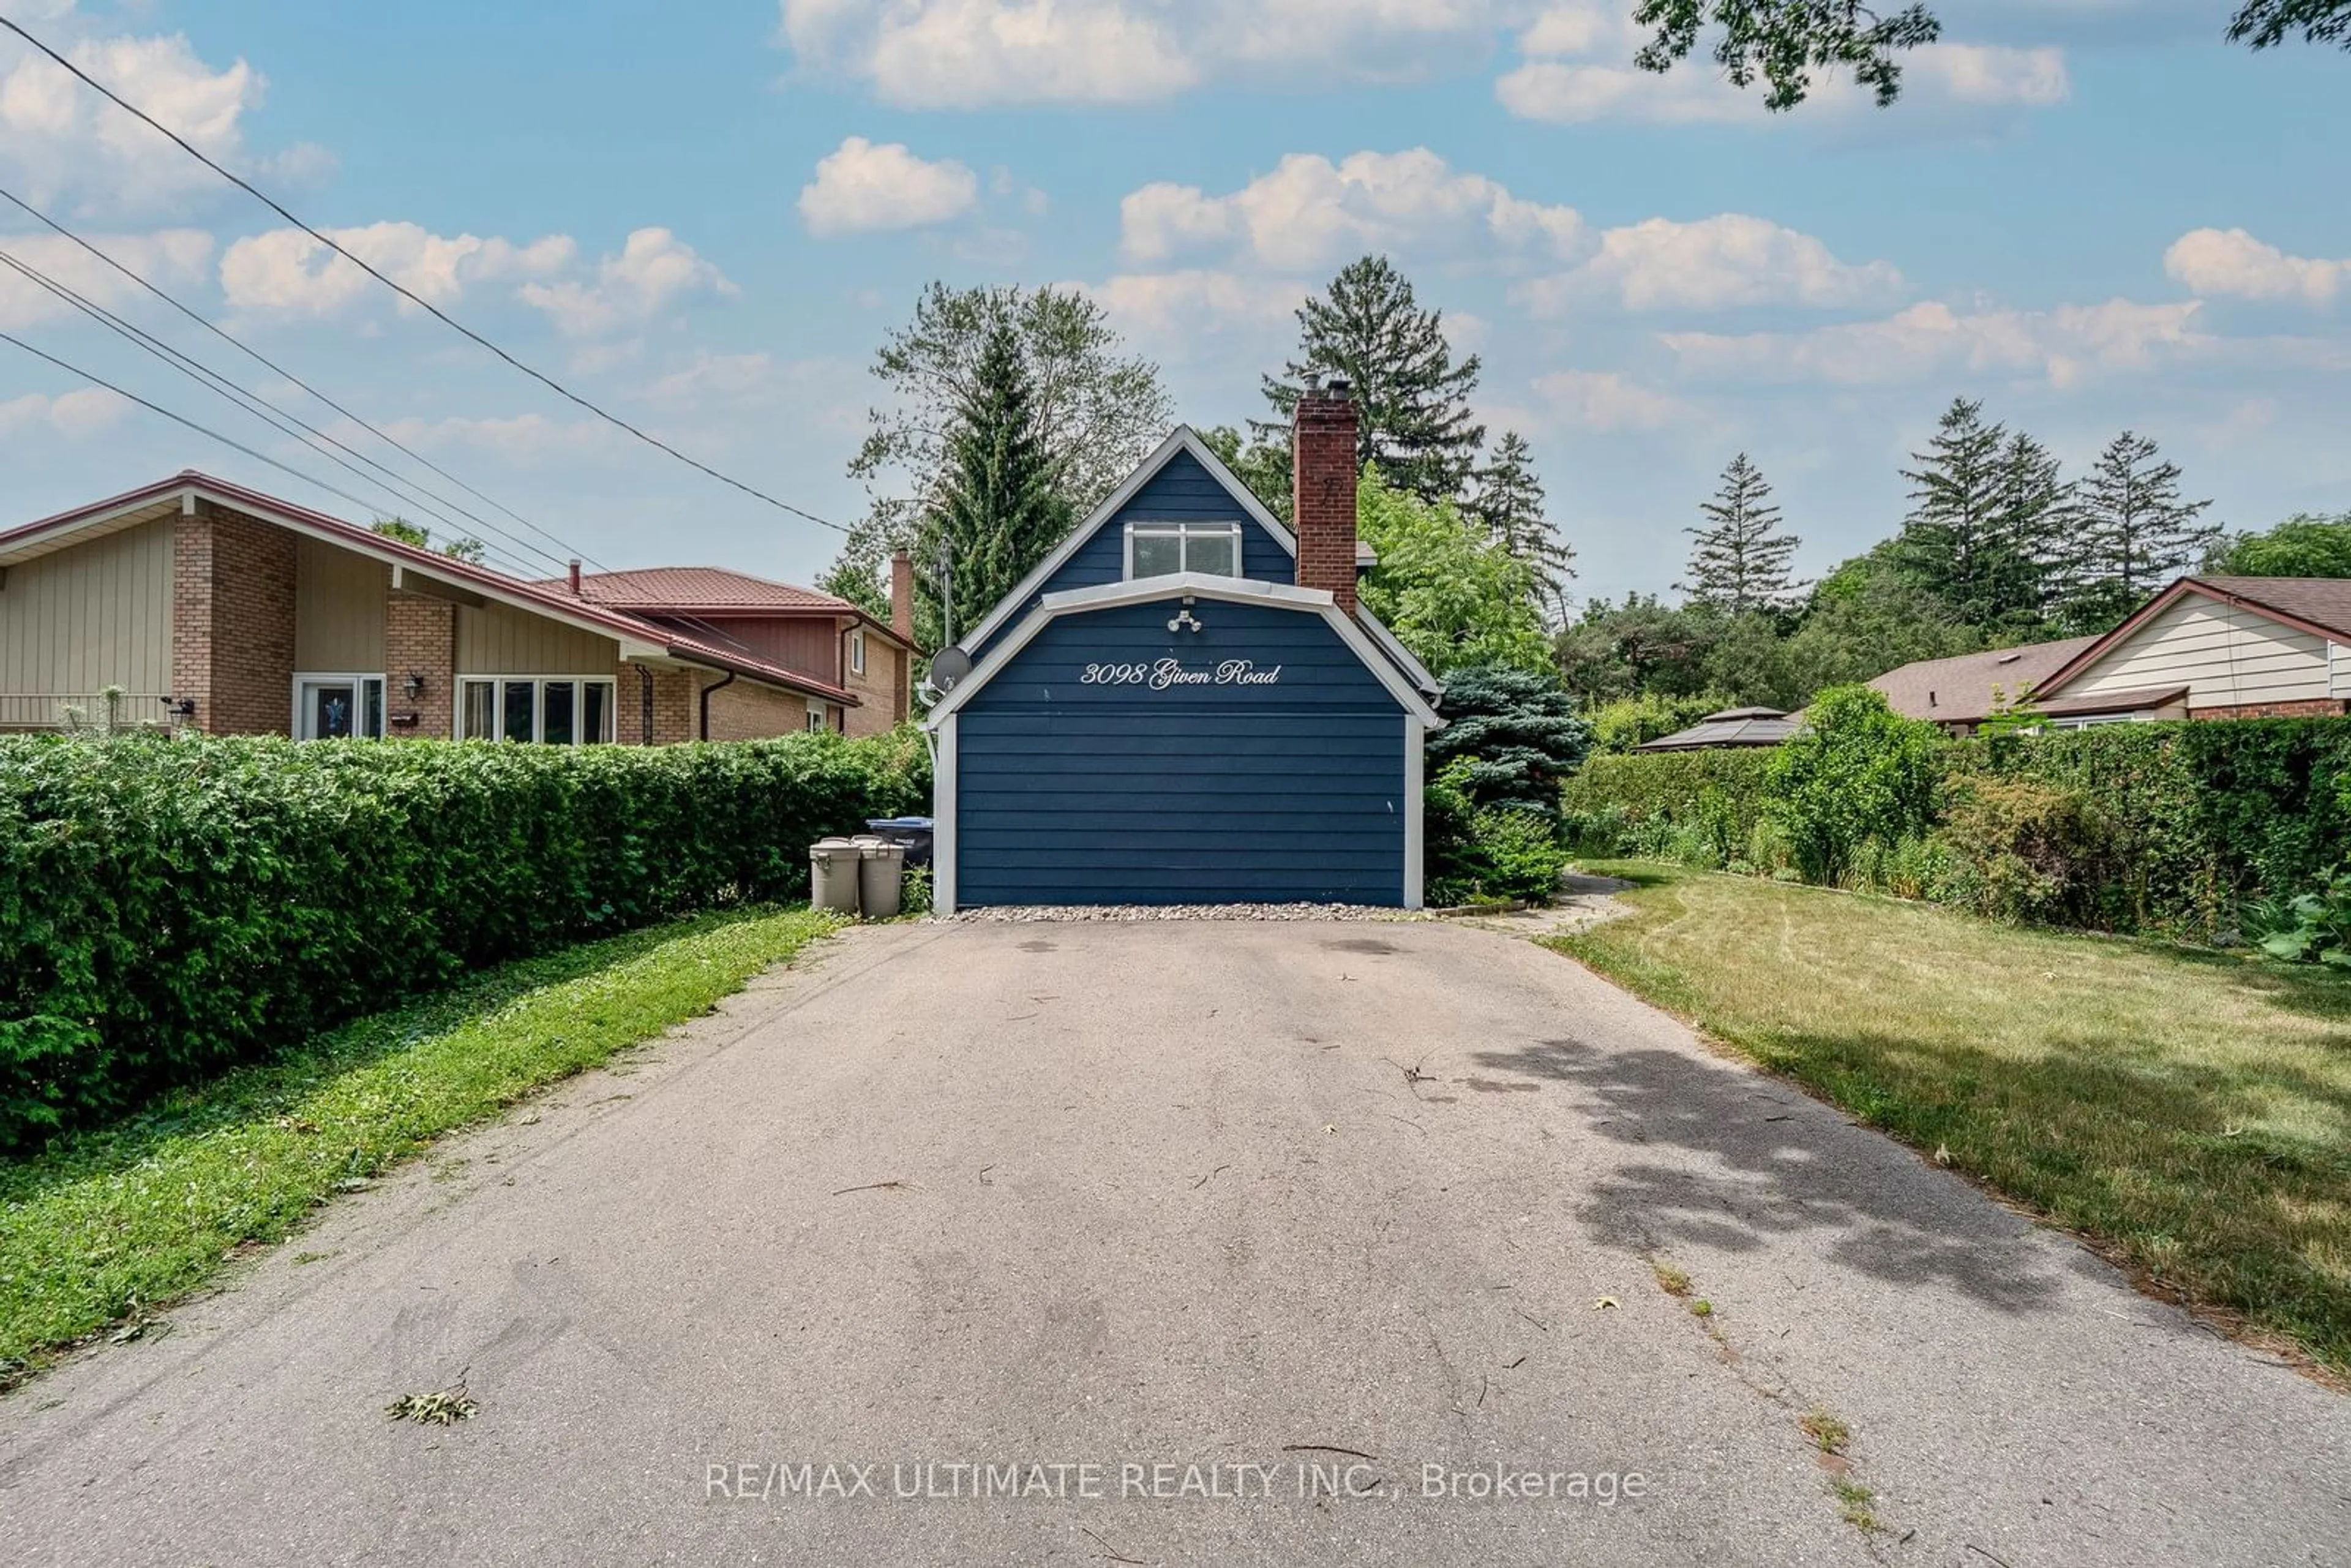 Frontside or backside of a home for 3098 Given Rd, Mississauga Ontario L5A 2N3